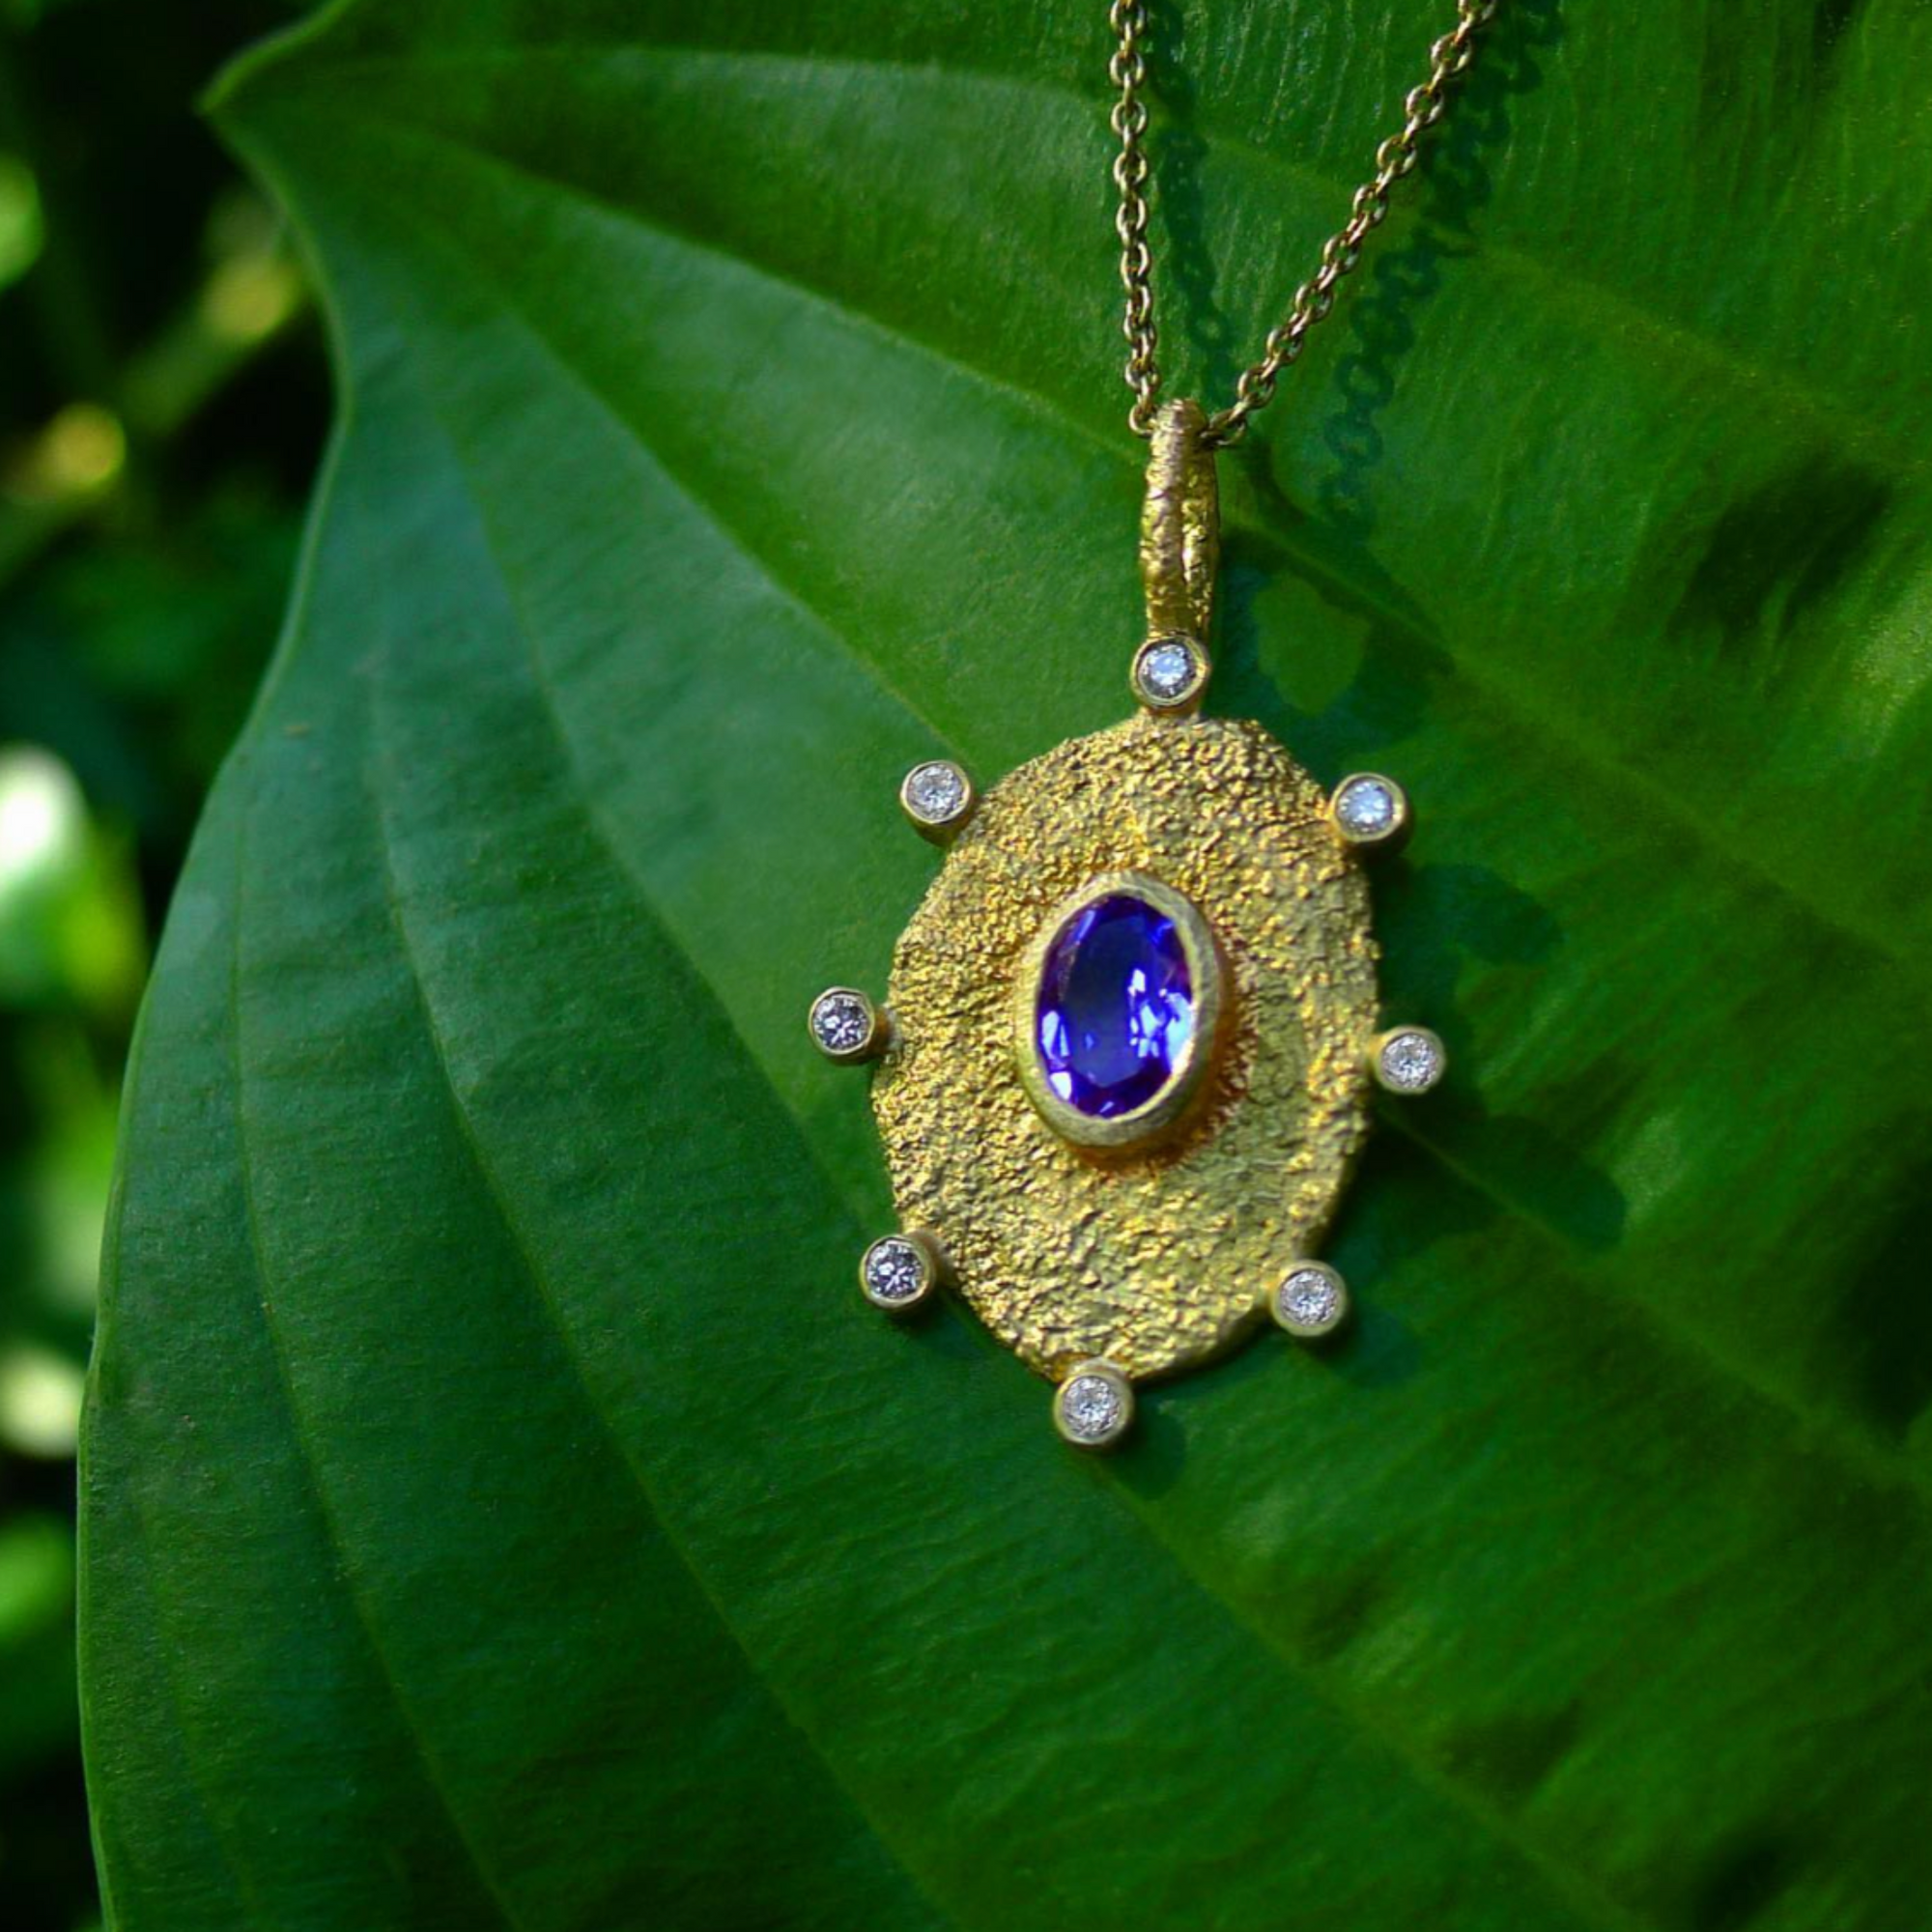 Rustic Tanzanite Necklace by Laurie Kaiser available at Talisman Collection Fine Jewelers in El Dorado Hills, CA and online.This pendant necklace features an oval cut tanzanite and 0.12 carats of brilliant white diamonds, all set in 18k gold. The organic shaped oval pendant hangs from a delicate 16" yellow gold chain. This necklace will add a touch of natural beauty to any outfit.